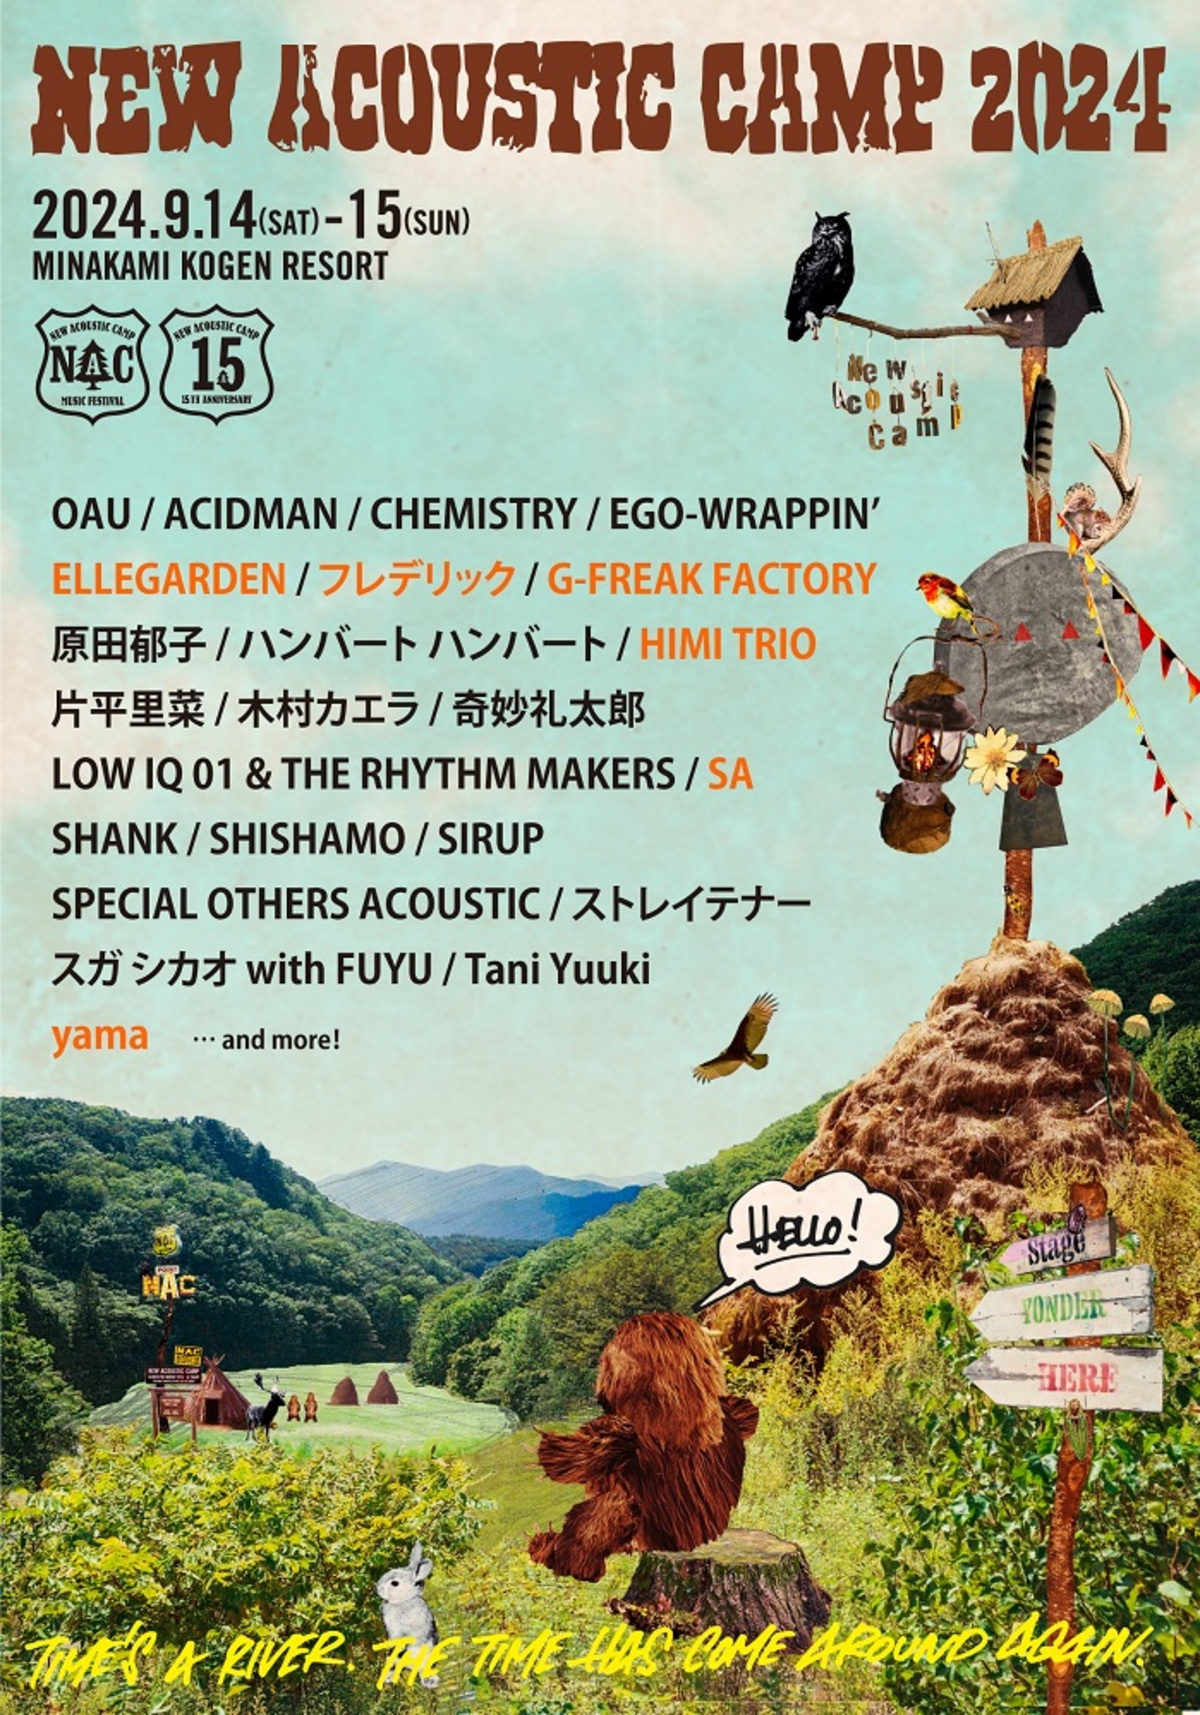 New Acoustic Camp 2024、第3弾出演者でG-FREAK FACTORY、ELLEGARDENら6組発表！ | 激ロック ニュース